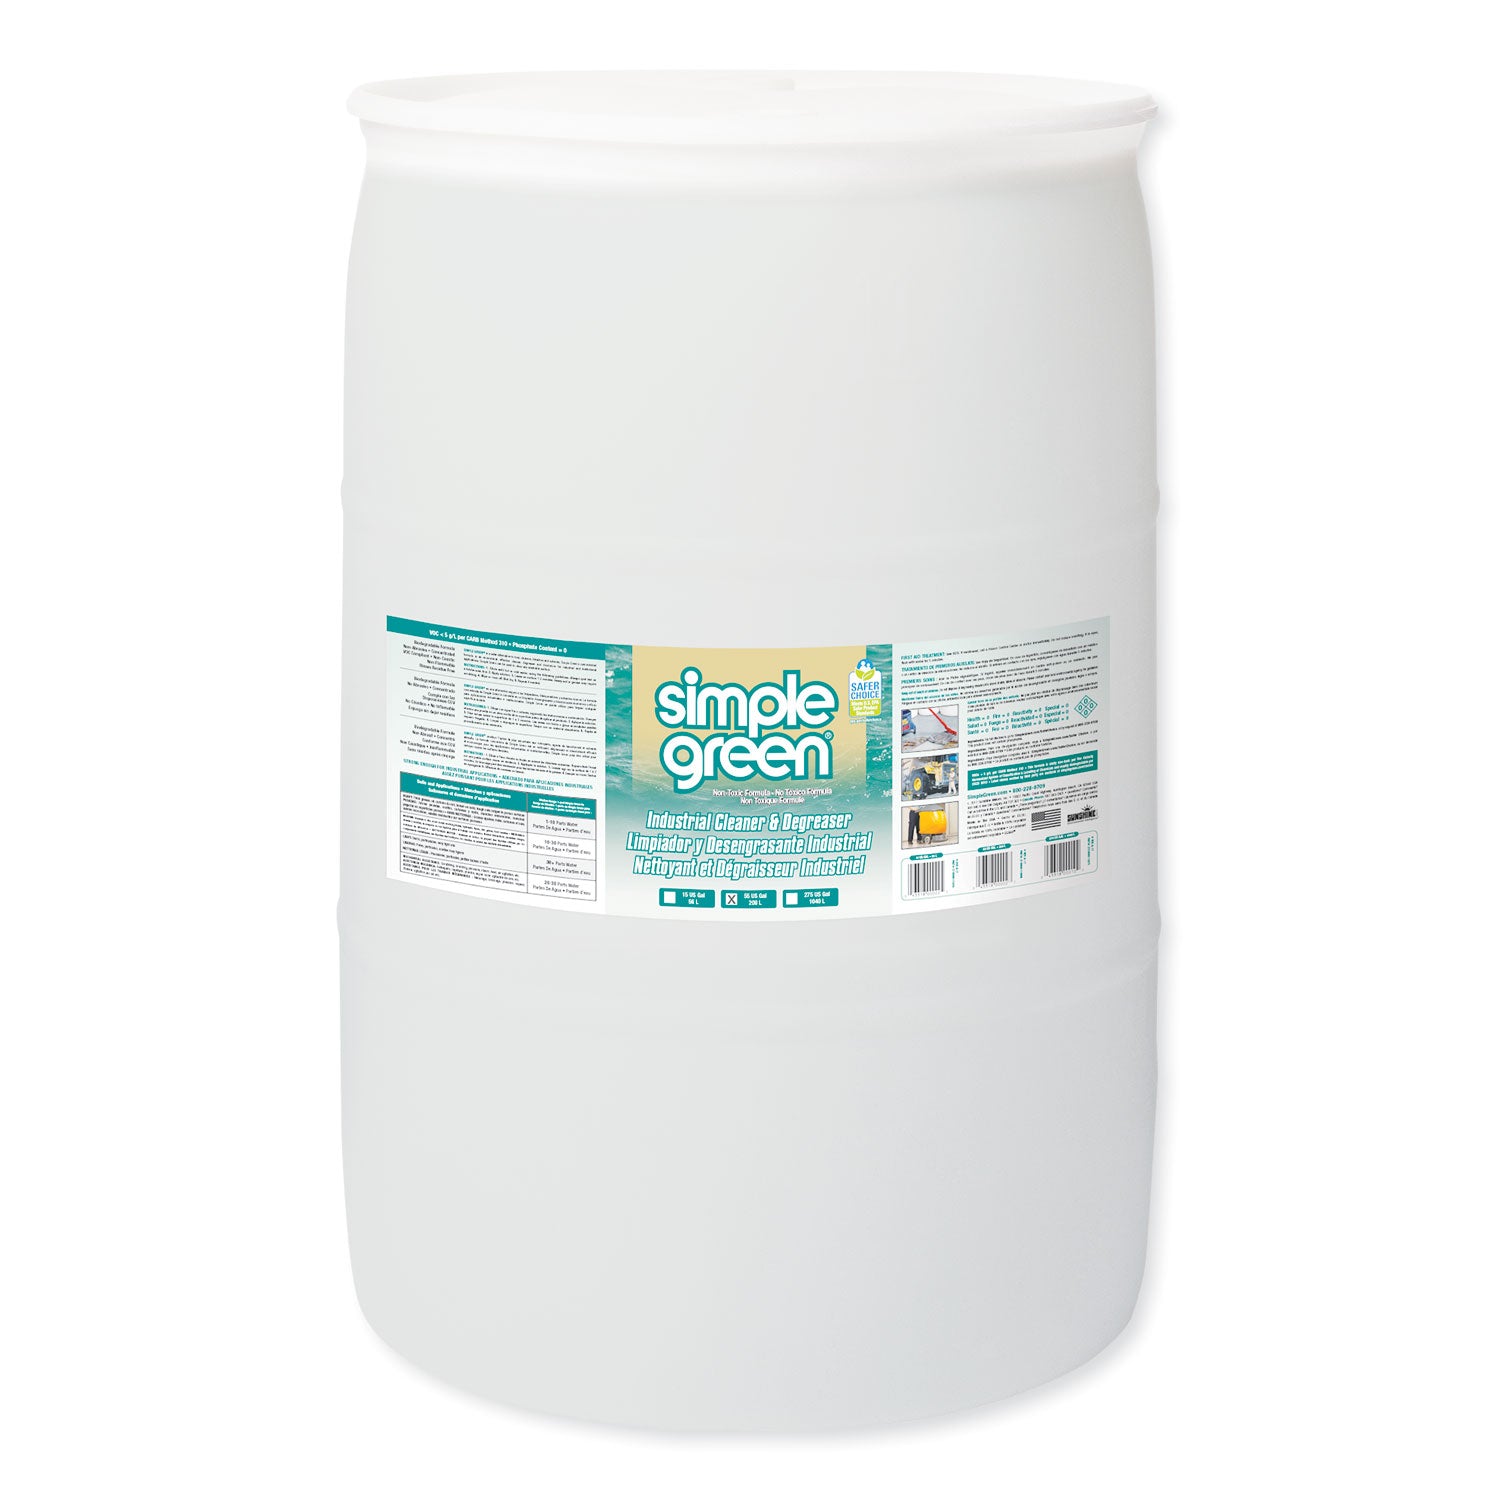 Industrial Cleaner and Degreaser, Concentrated, 55 gal Drum - 